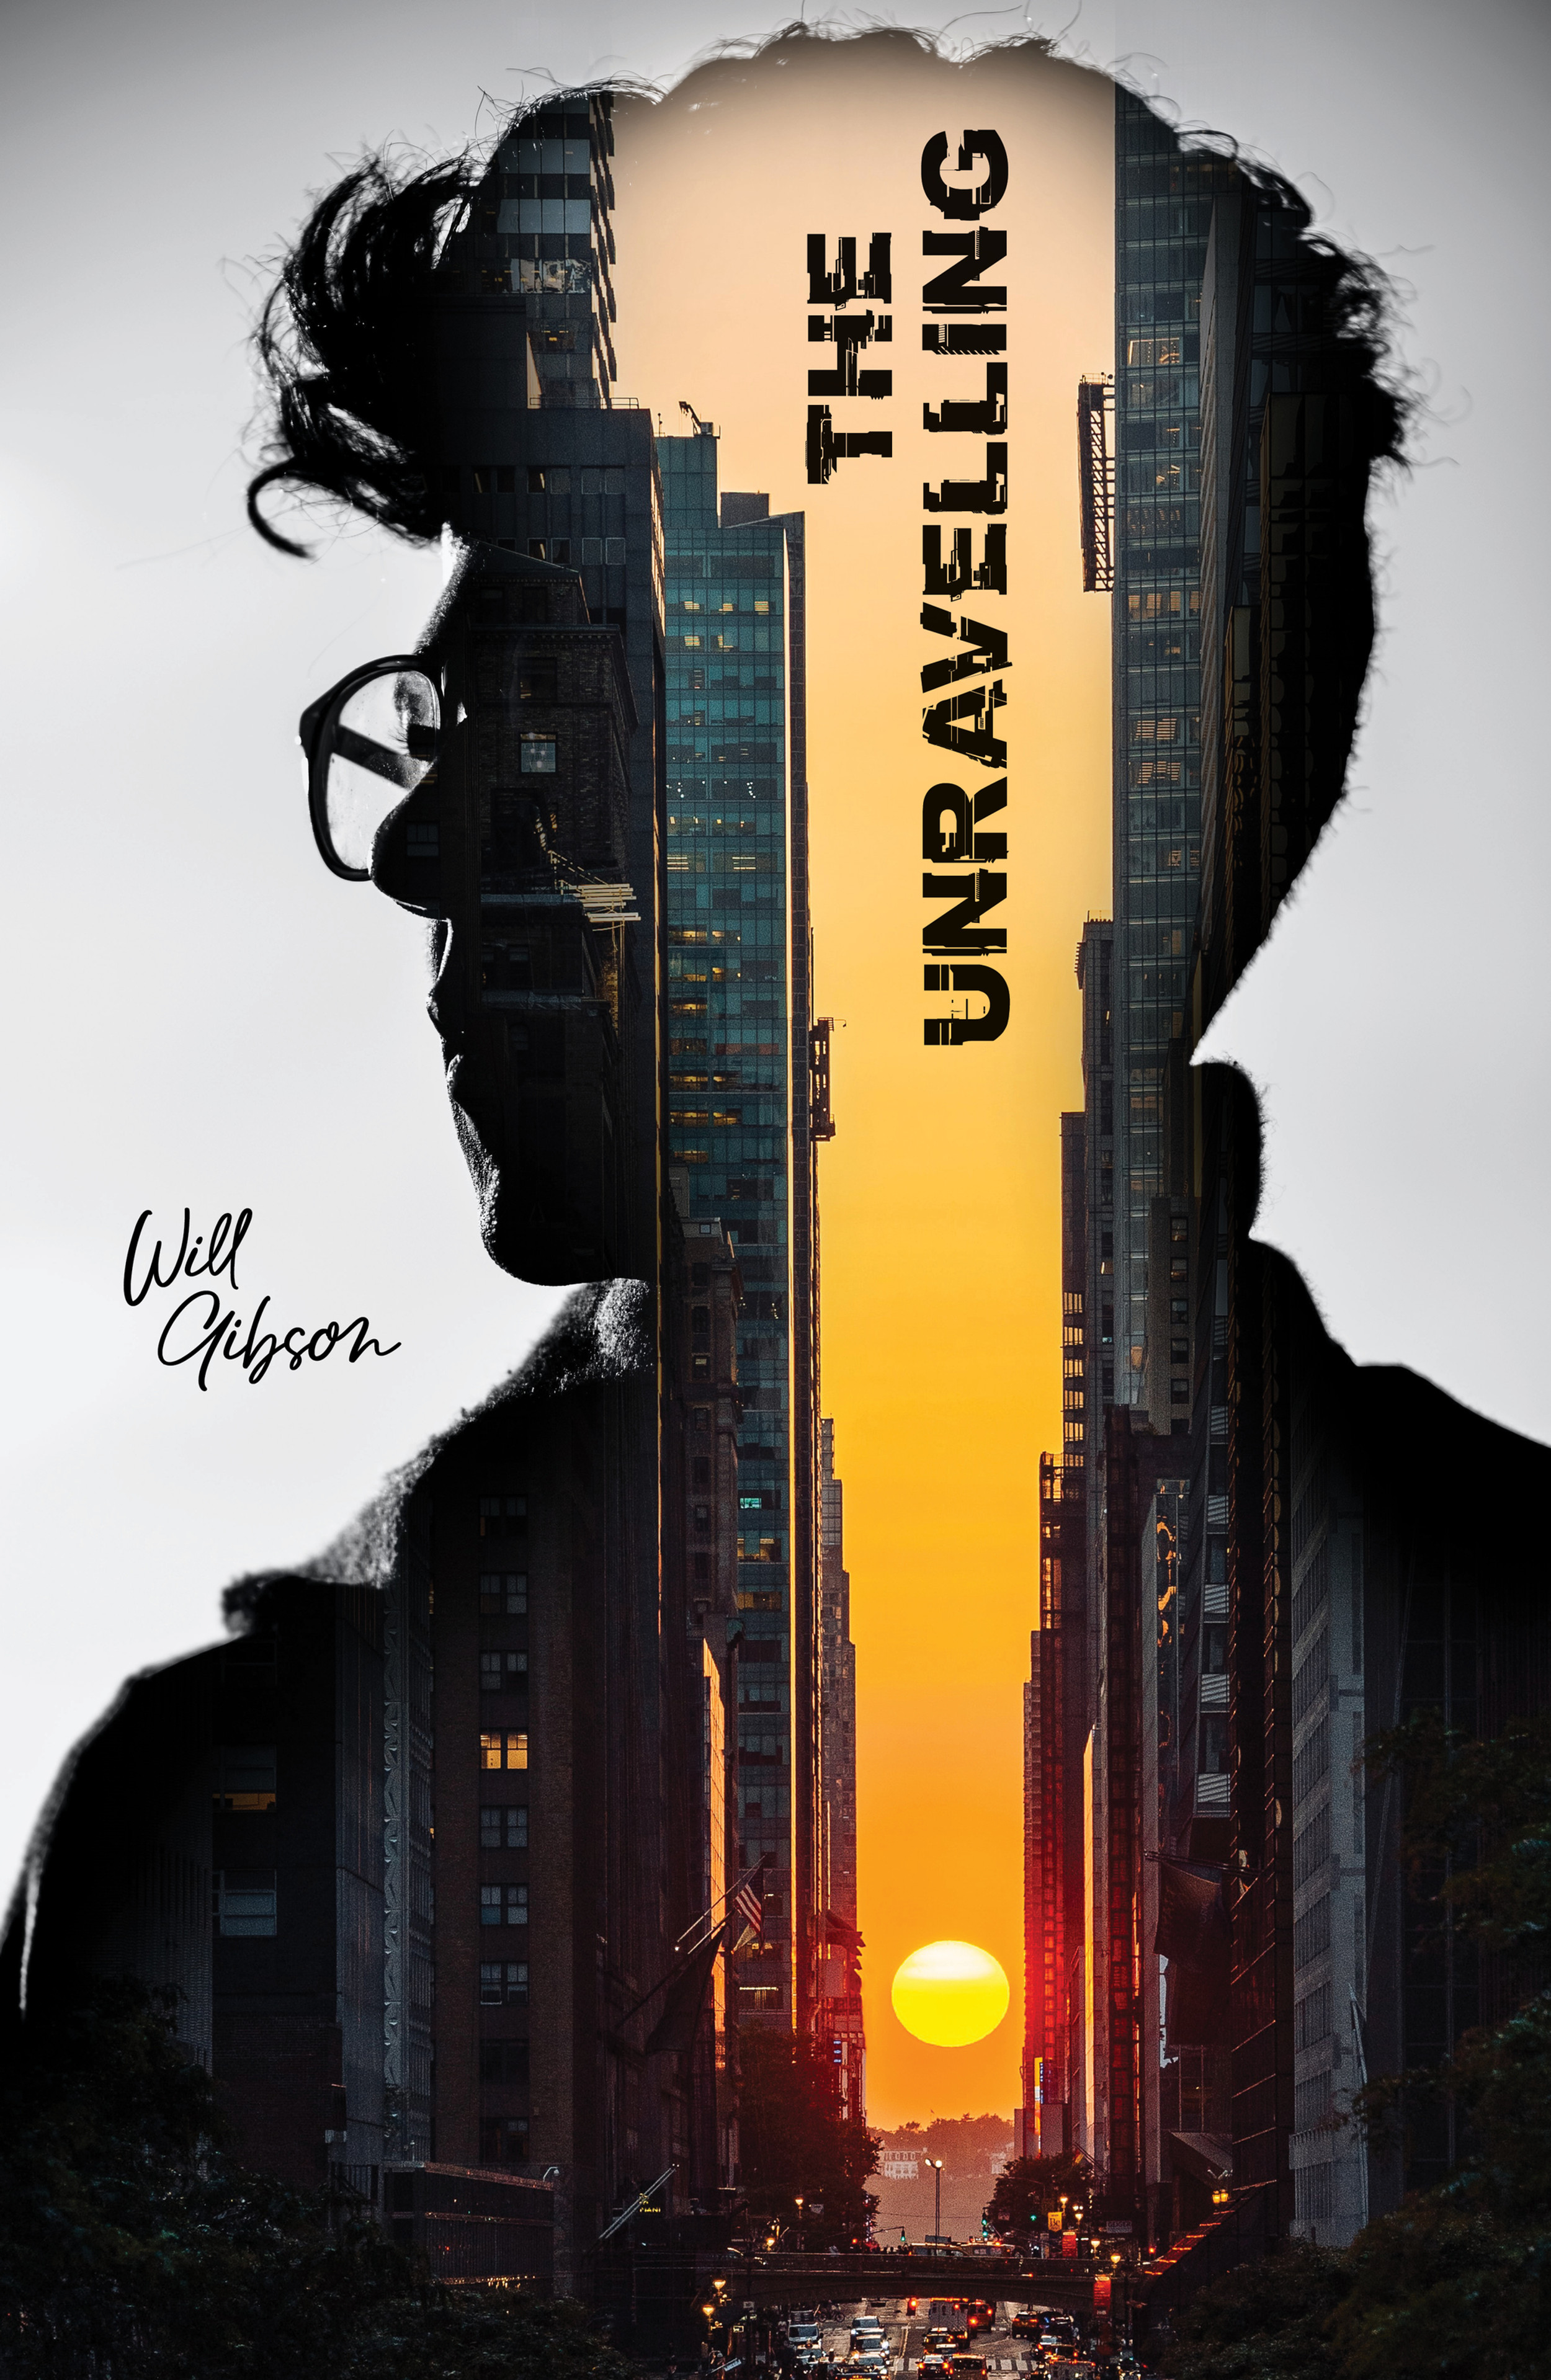 The Unravelling – Futuristic & Thriller Book By Will Gibson